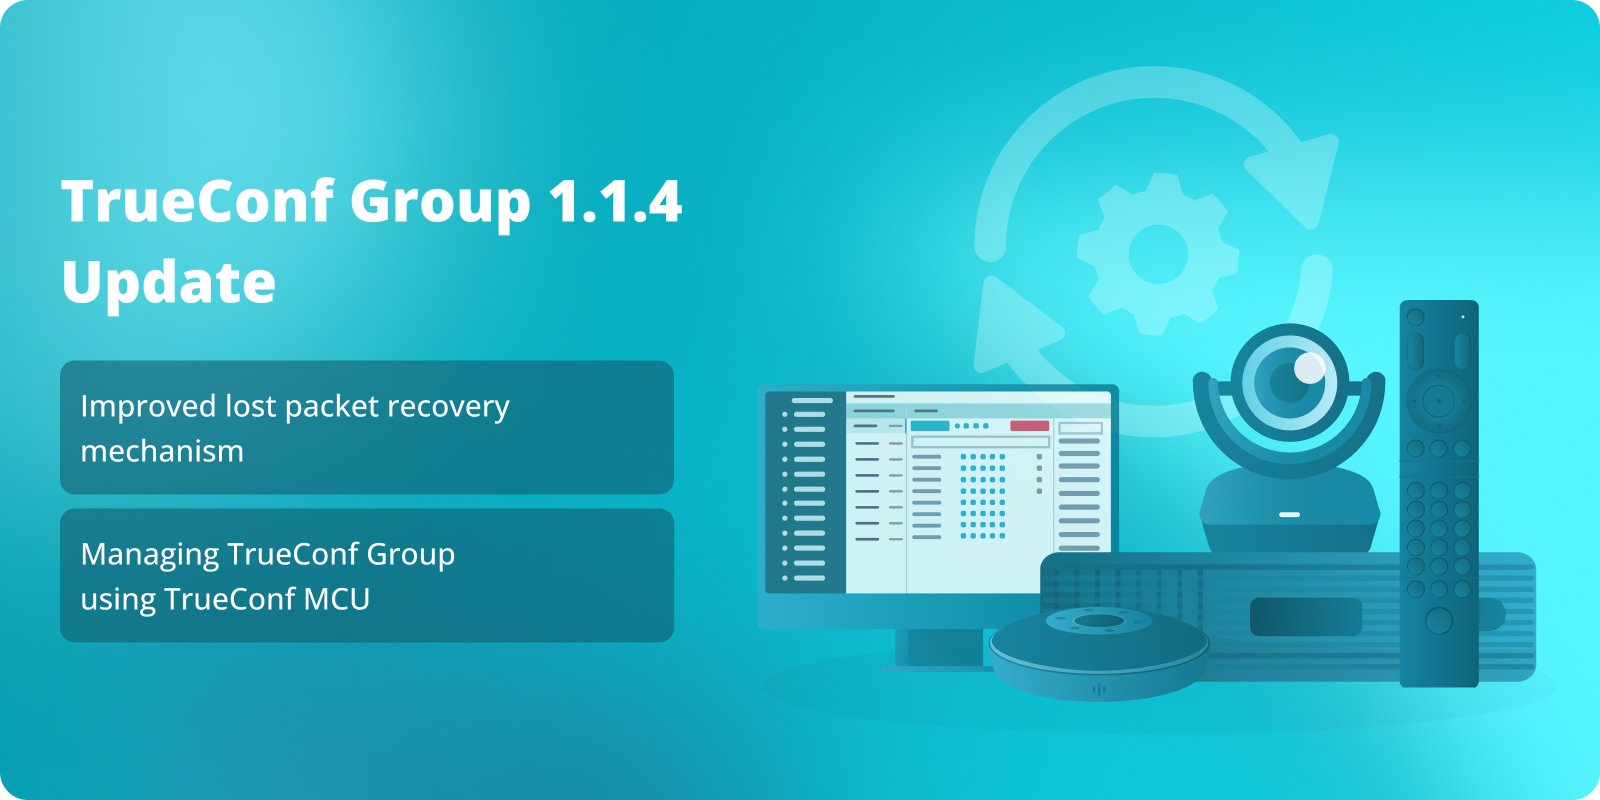 TrueConf Group 1.1.4: improved recovery mechanism for lost packets and integration with TrueConf MCU 1